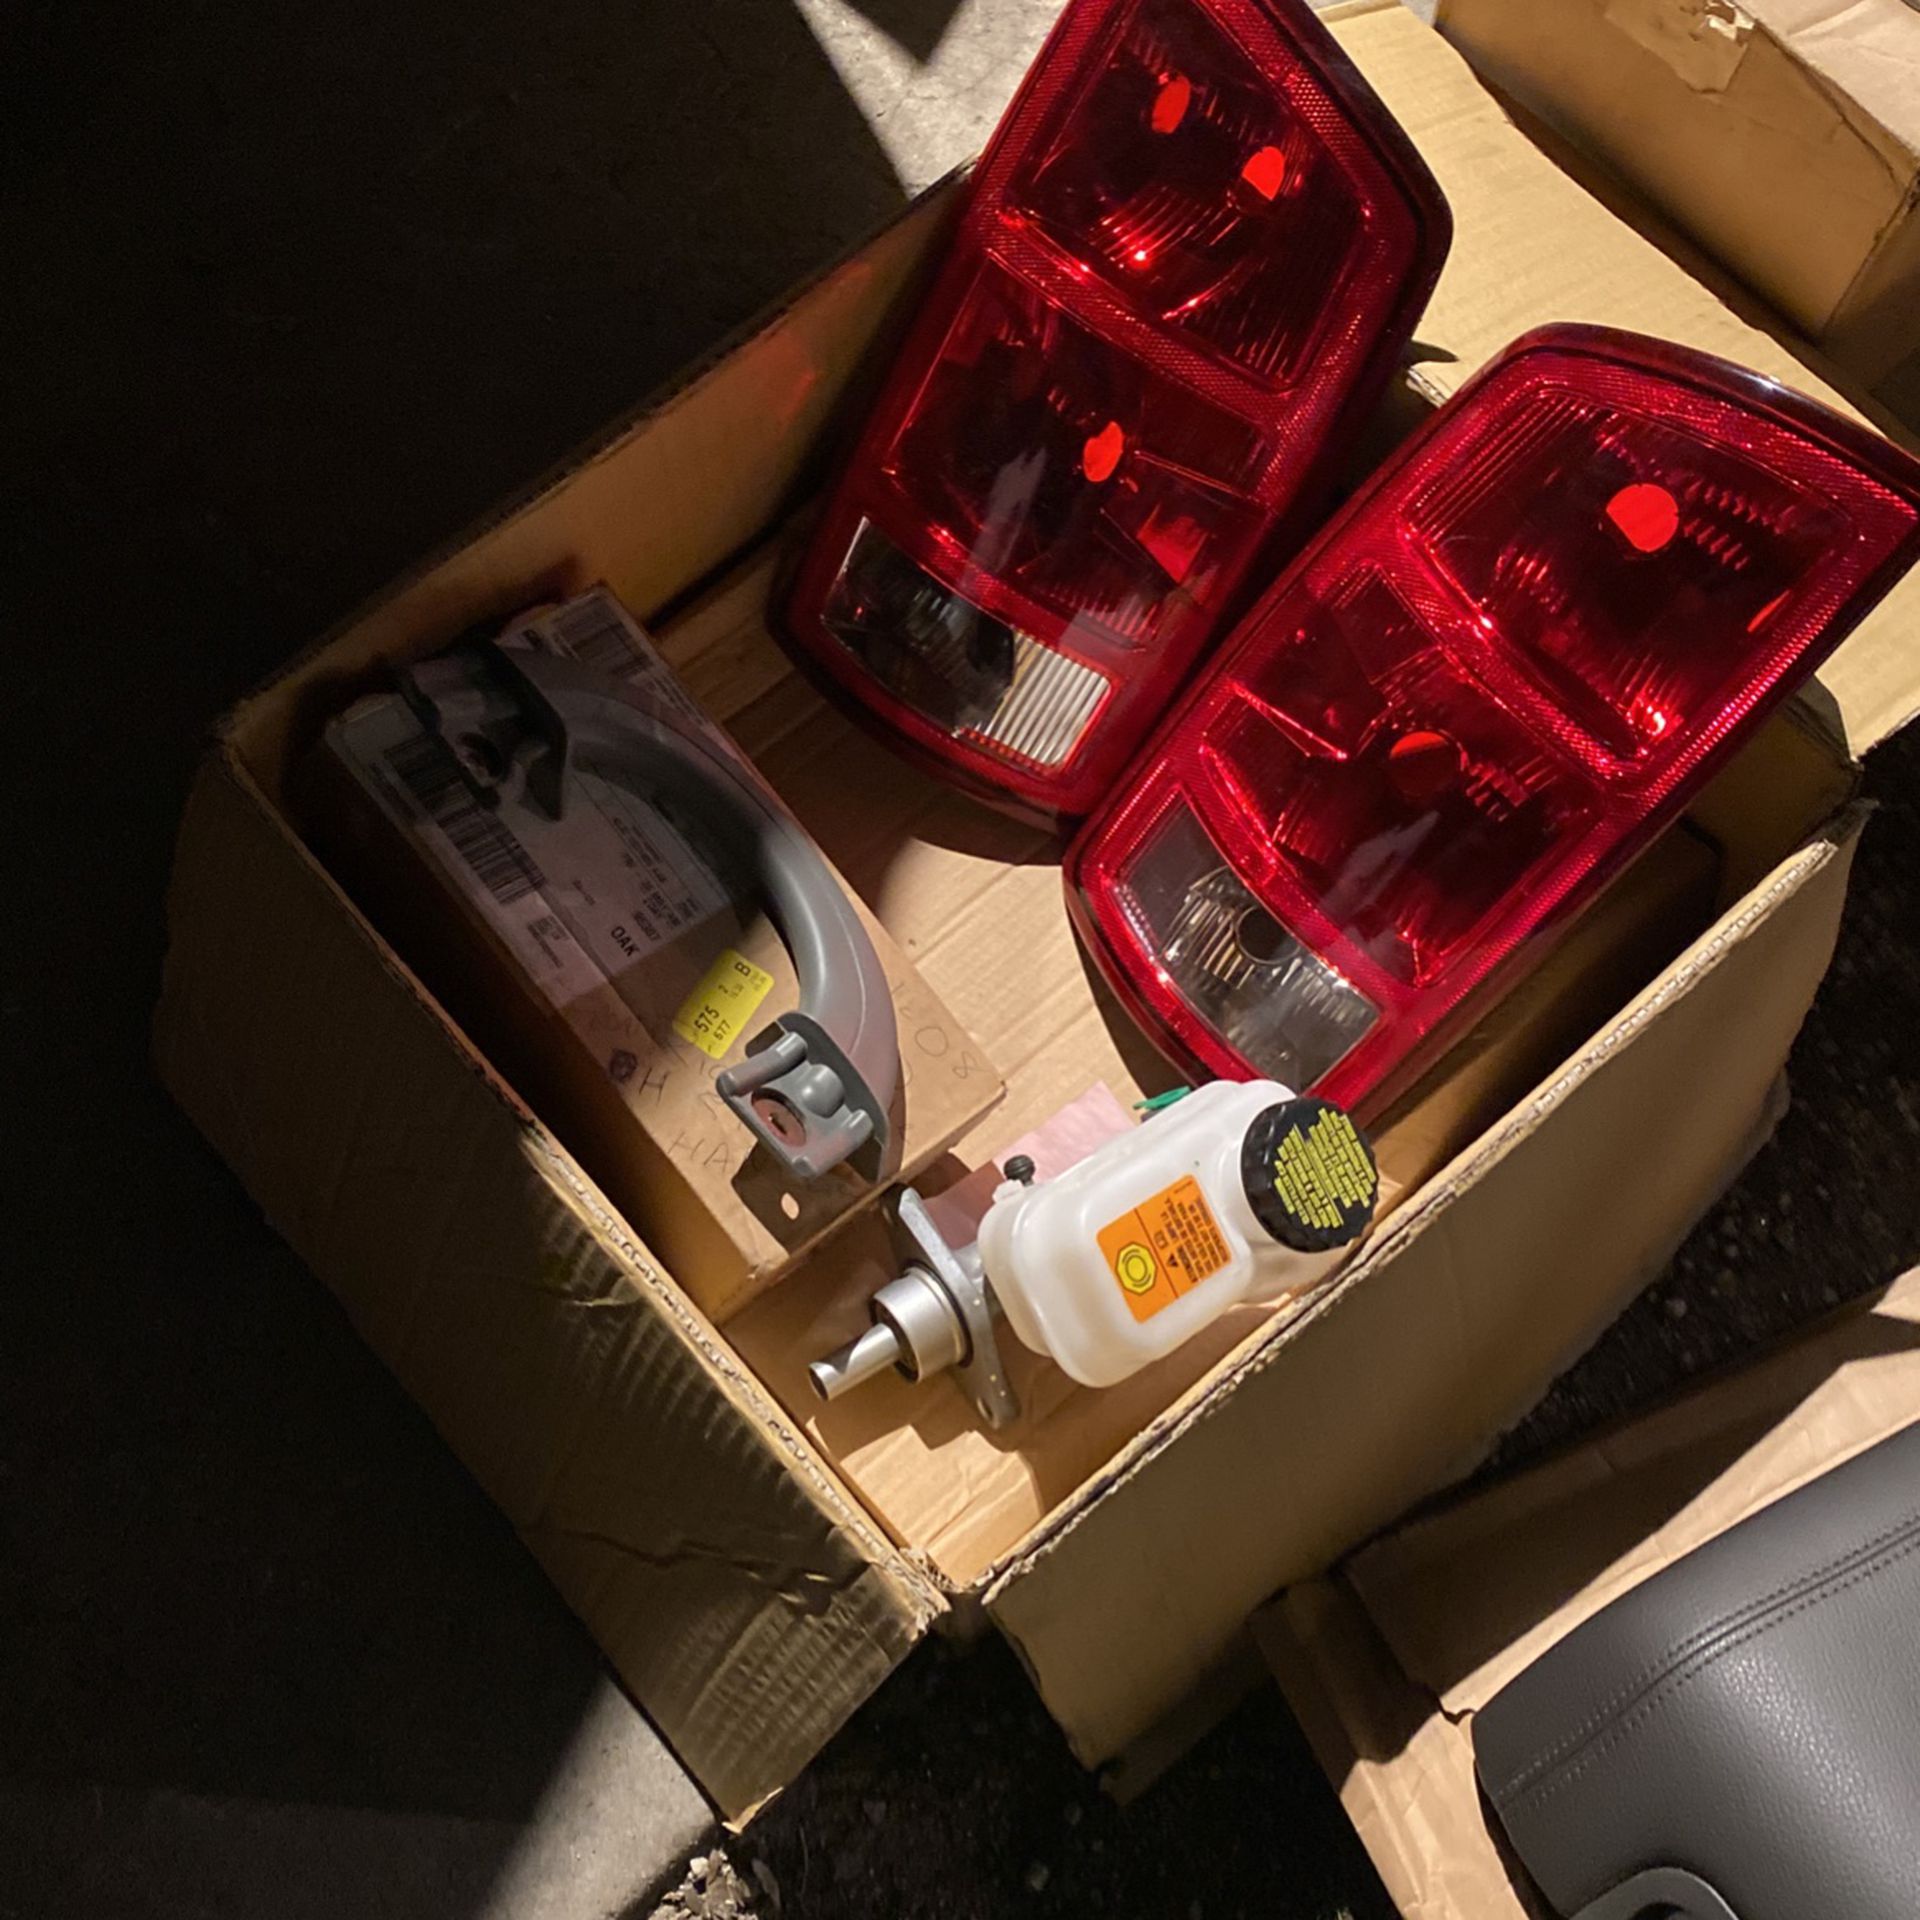 Brand New Center Consol For Ford Truck Brand New Tail Lights  New Break fluid Resovor Mirrors Door Handle And  Fuel pump 